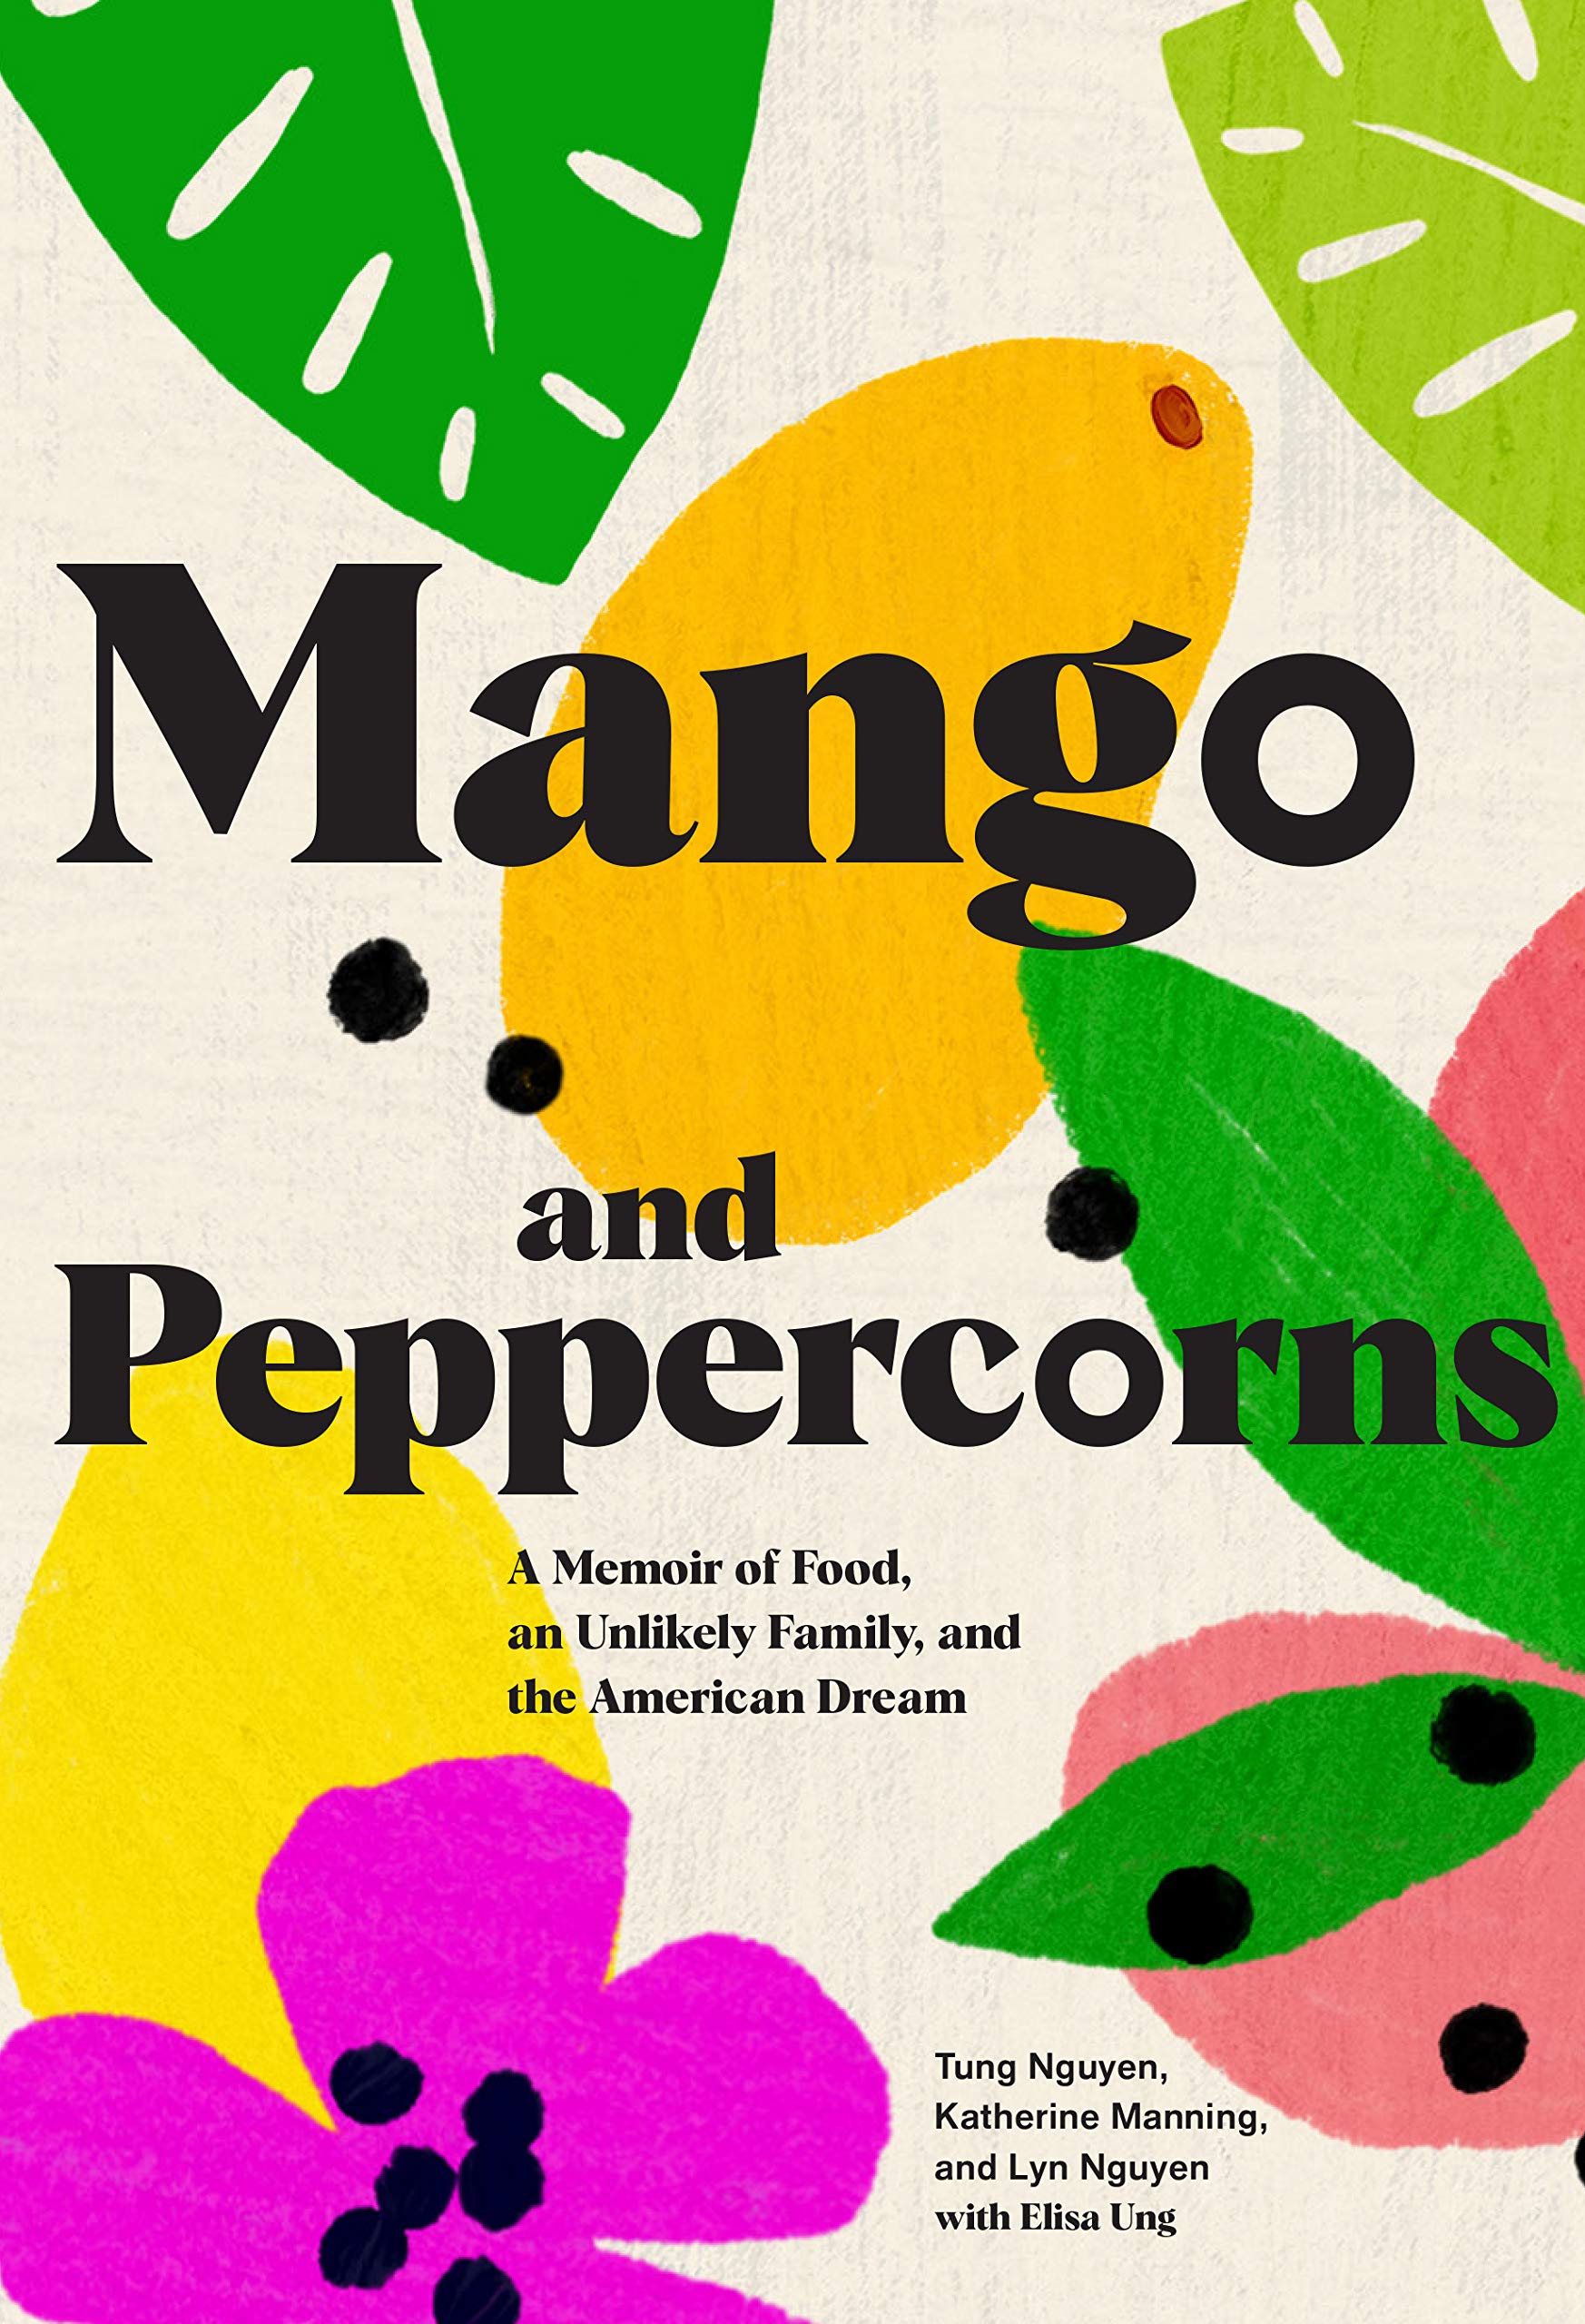 A graphic of the cover of Mango and Peppercorns: A Memoir of Food, an Unlikely Family, and the American Dream by Tung Nguyen, Katherine Manning, Lyn Nguyen, with Elisa Ung